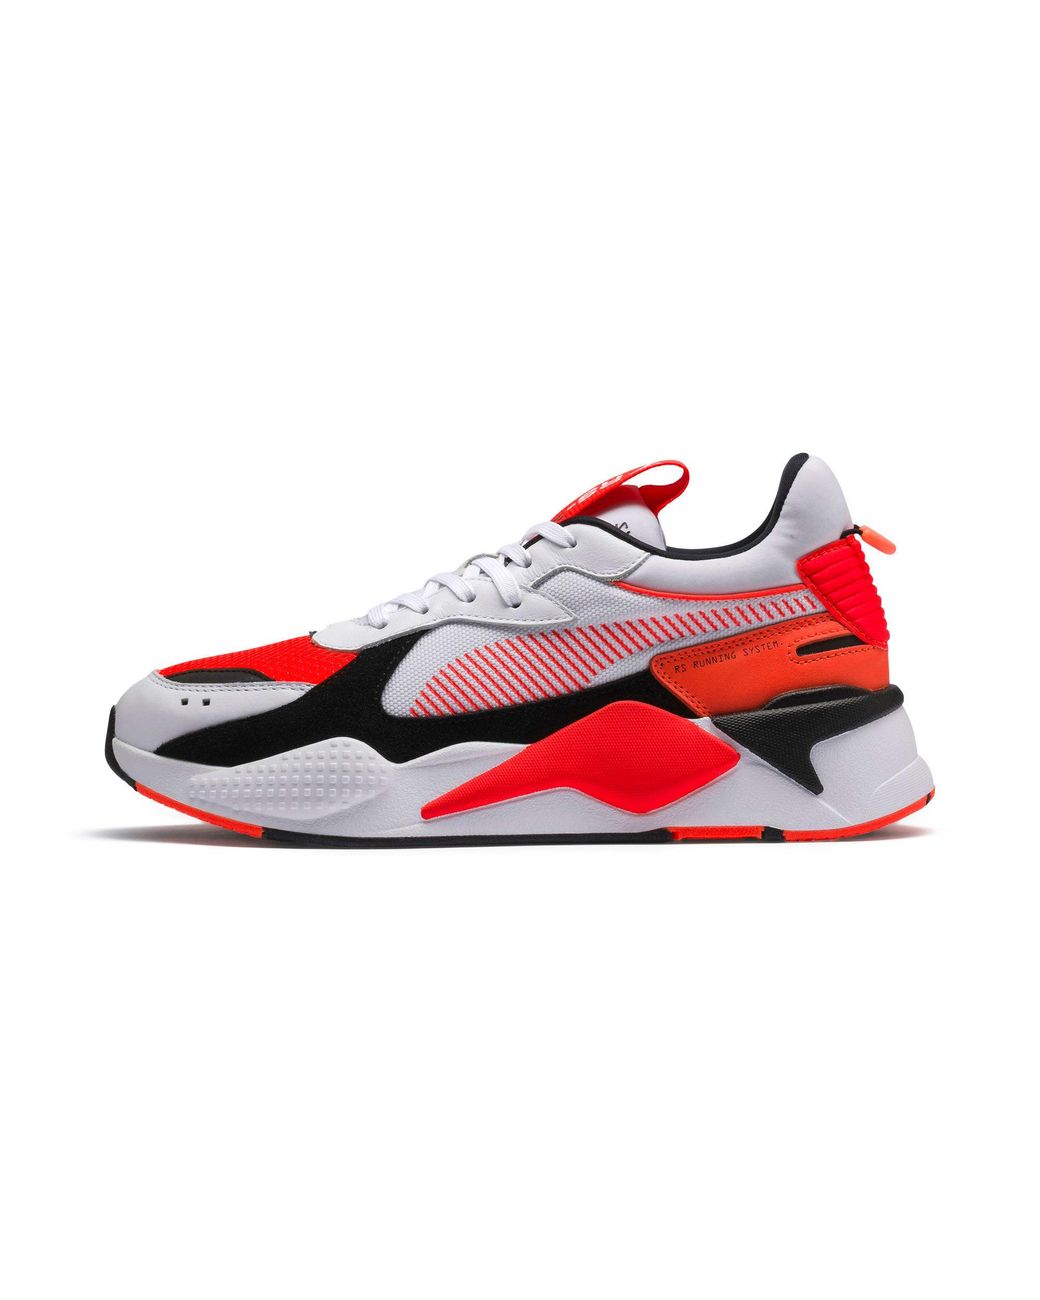 PUMA Leather Rs-x Reinvention Sneakers in 02 (Red) for Men - Lyst